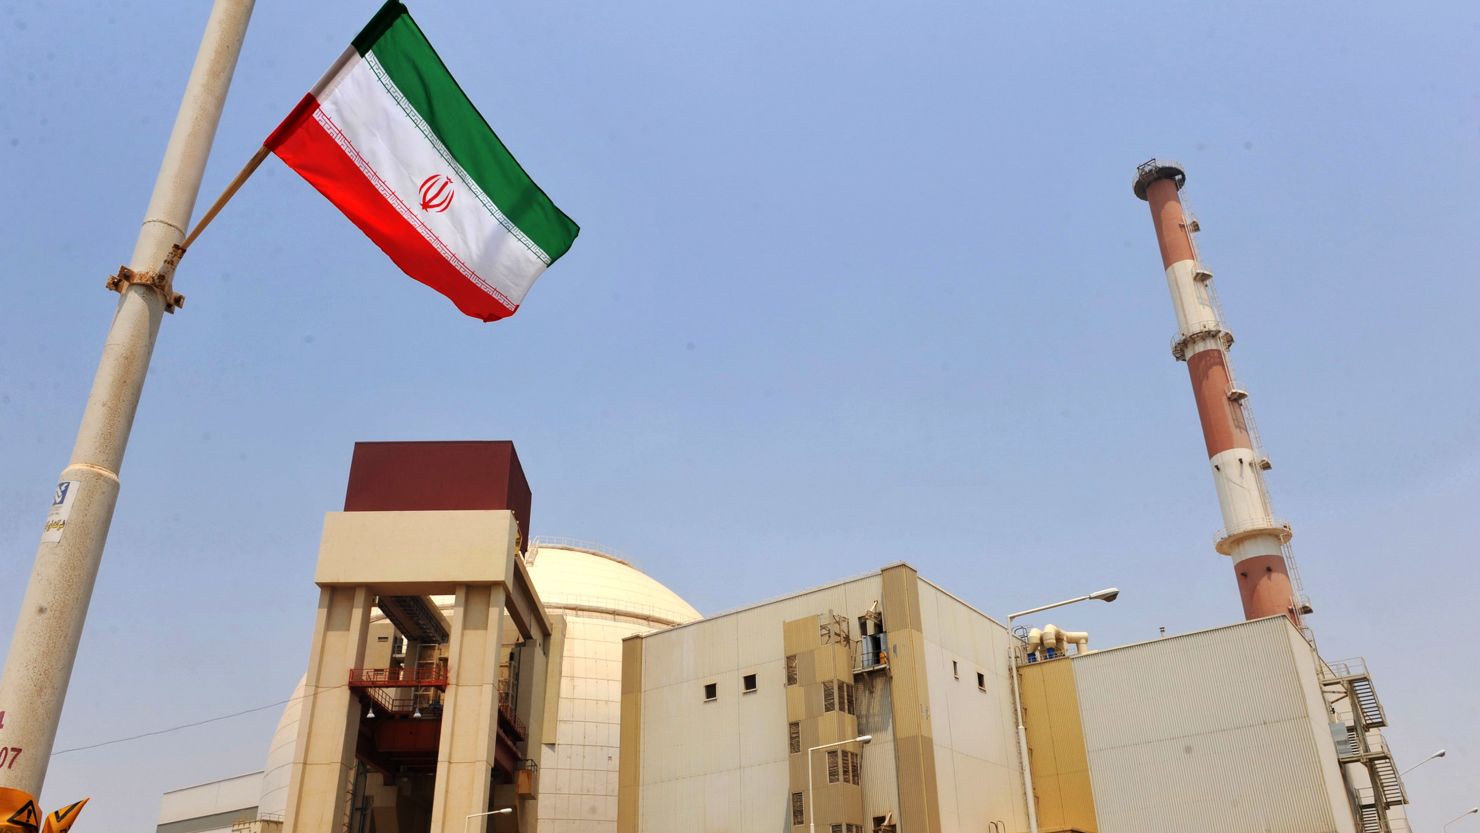 US and Europe have imposed sanctions on Tehran's crude oil exports amid concerns that it is trying to develop a nuclear bomb.